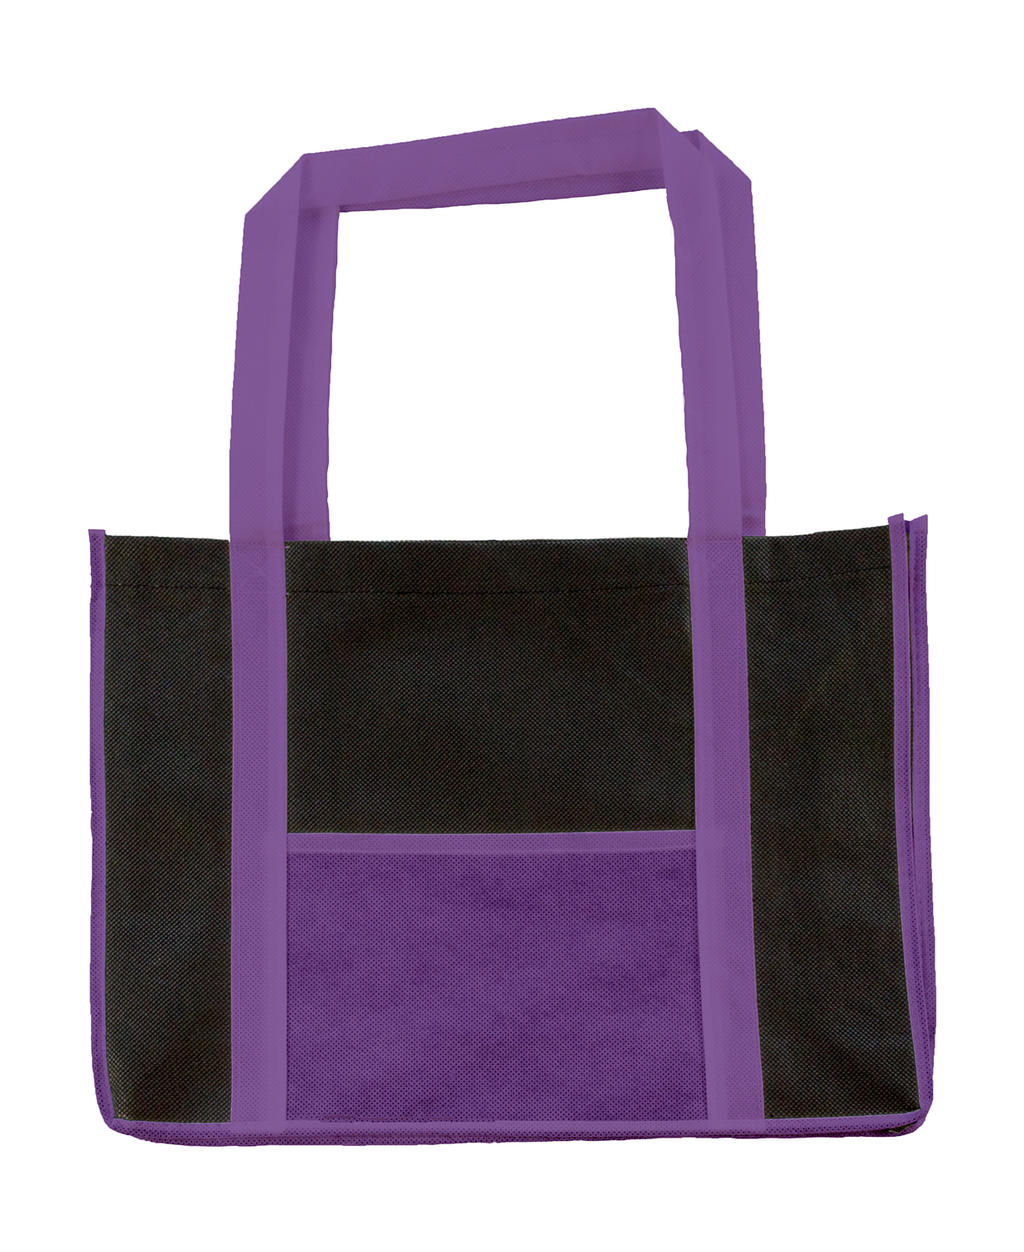  Leisure Bag LH in Farbe Lilac/Black